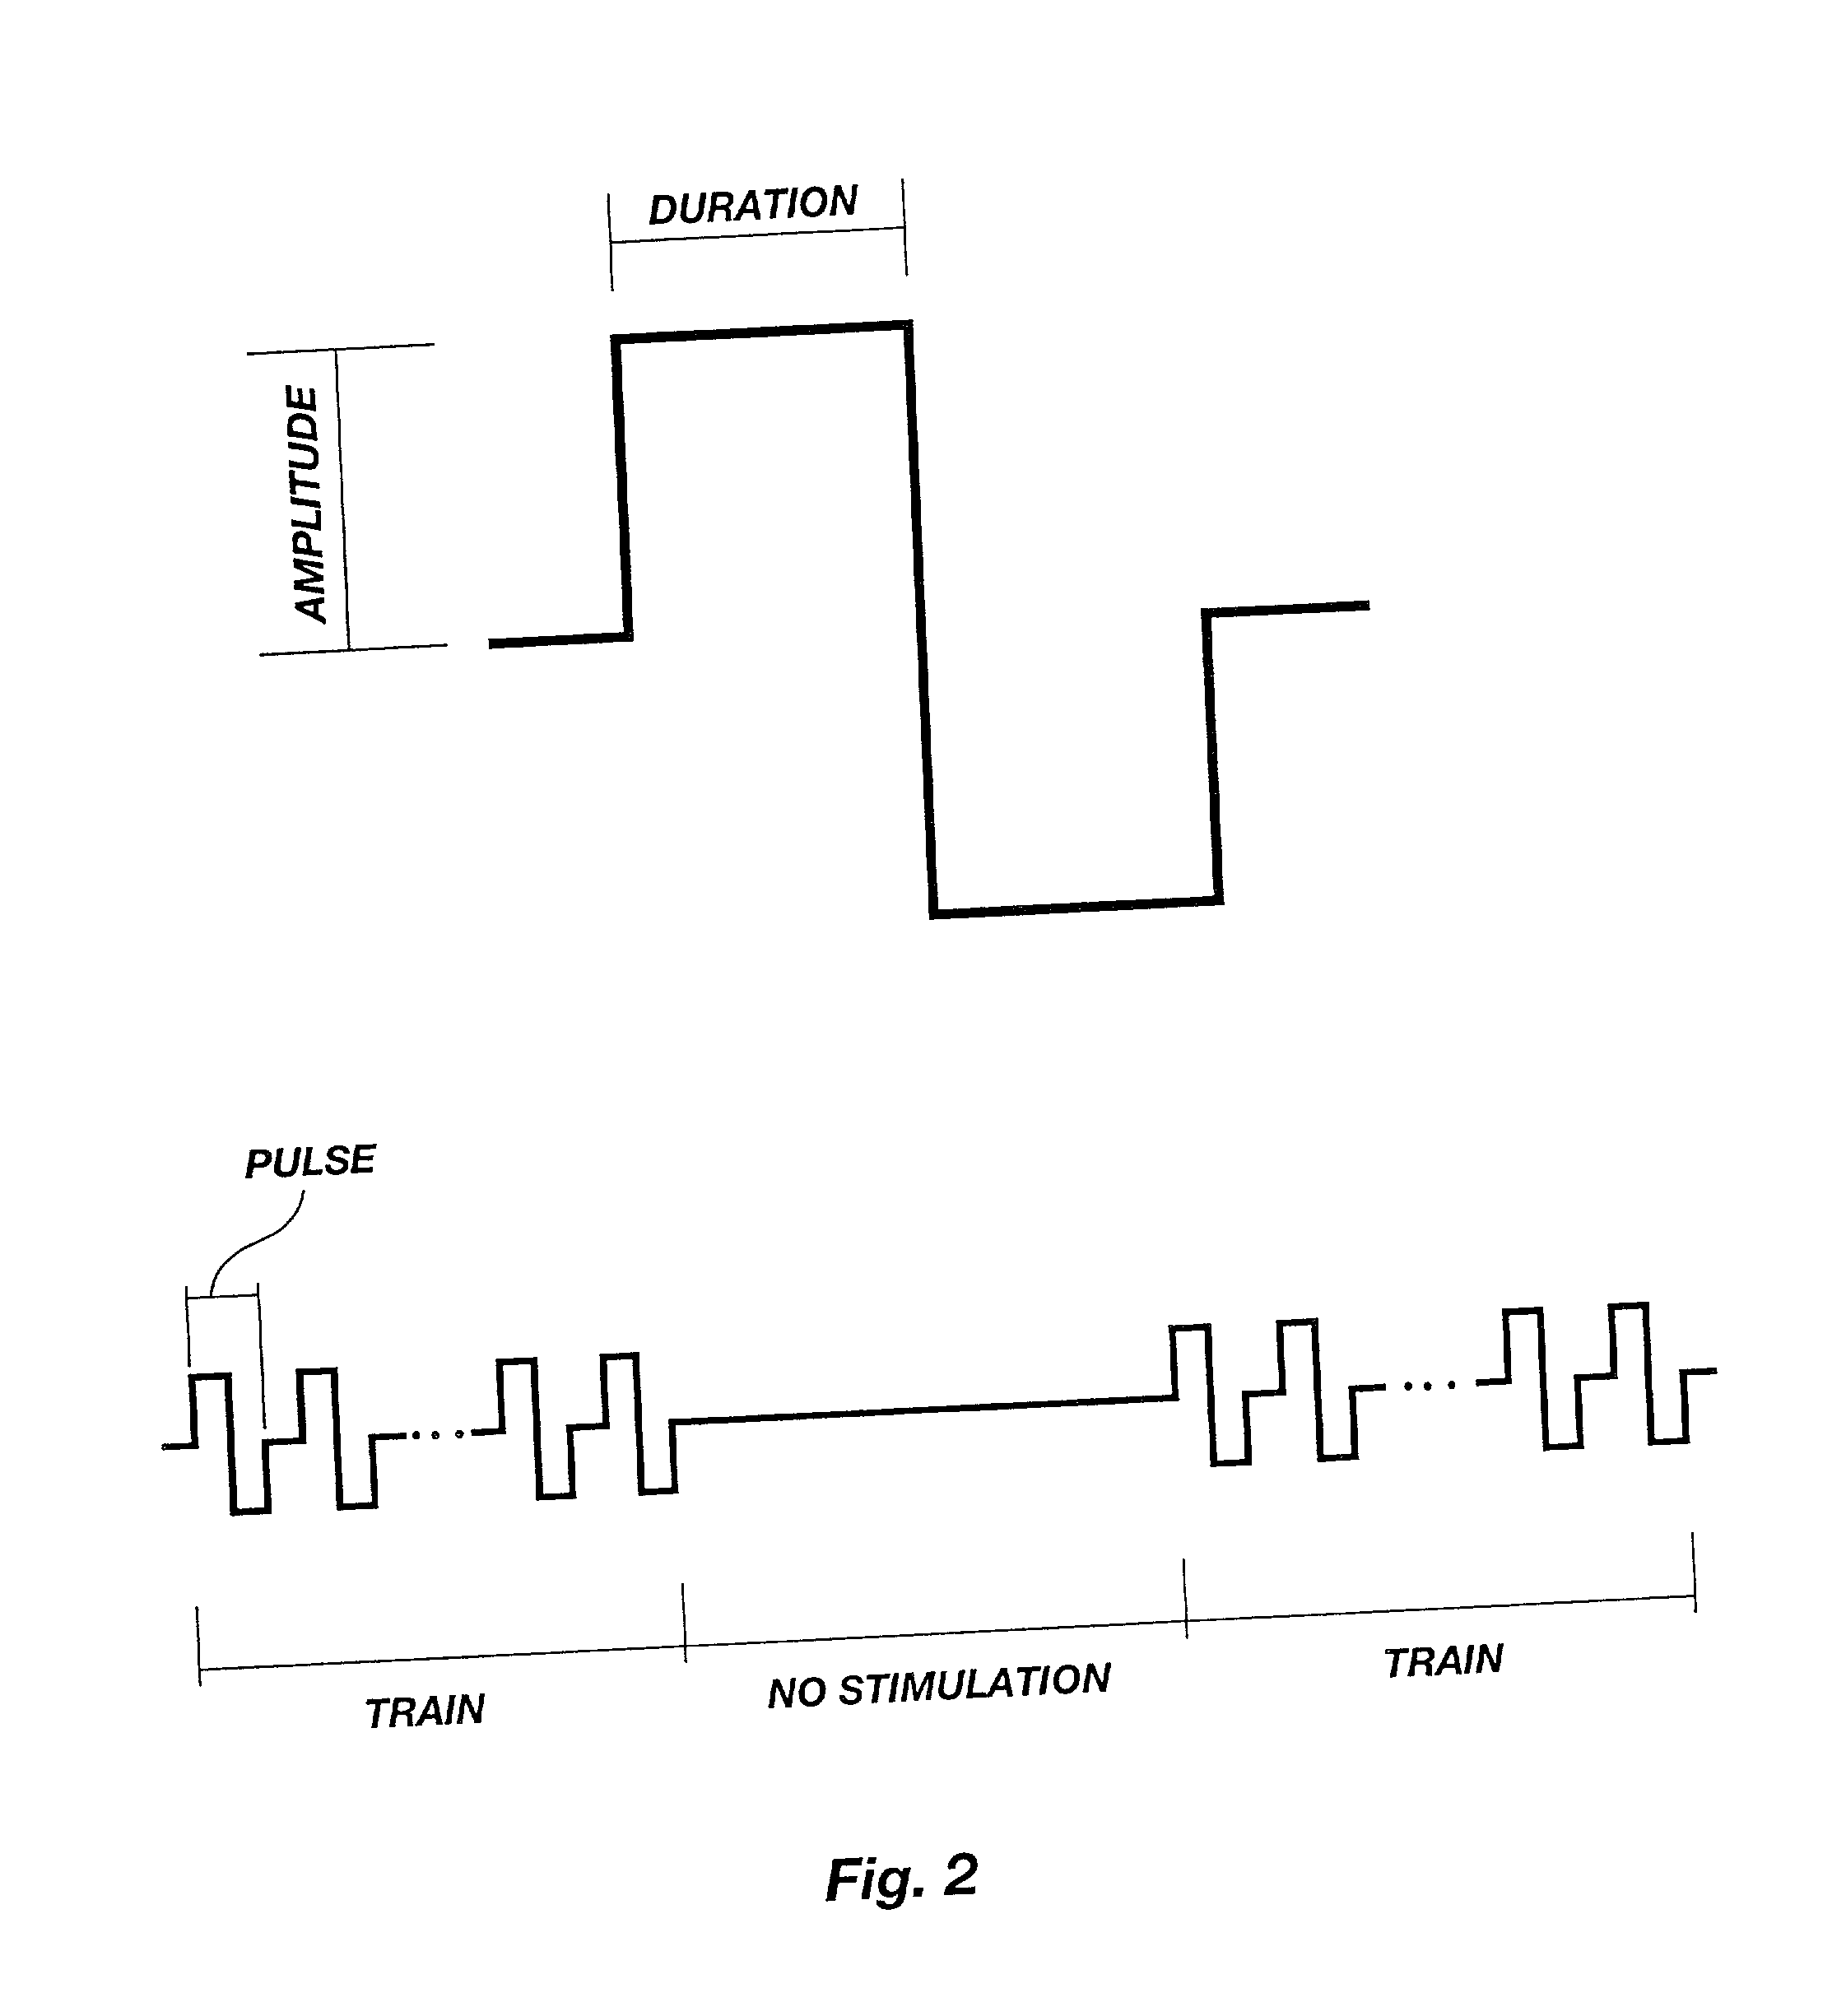 Method for genetic immunization and introduction of molecules into skeletal muscle and immune cells